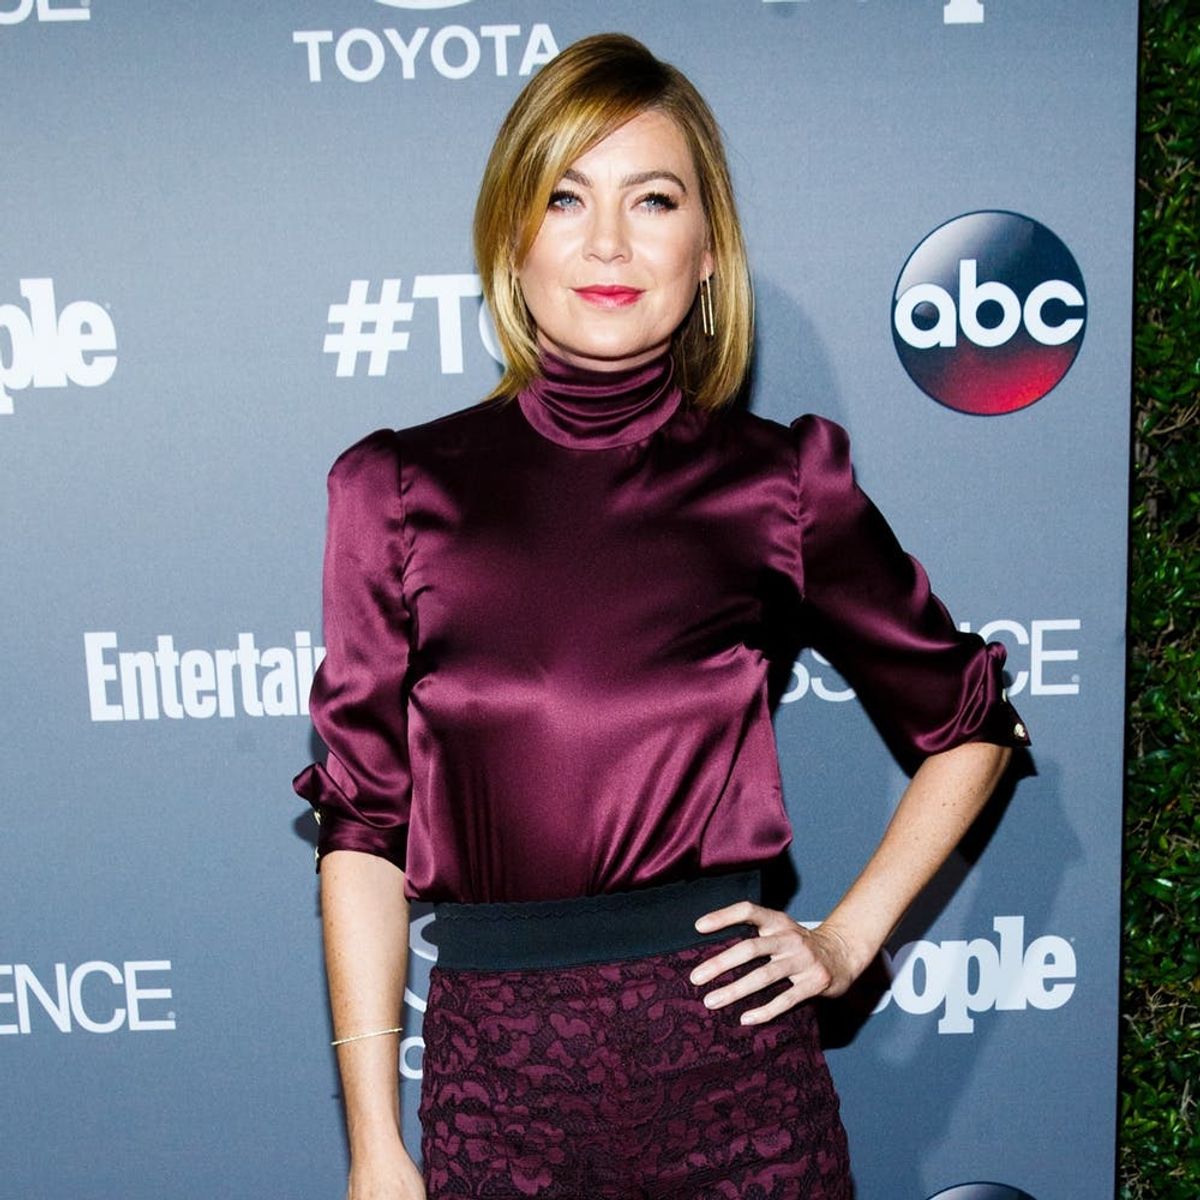 Ellen Pompeo Is in a War With Twitter Over the Use of These Emojis